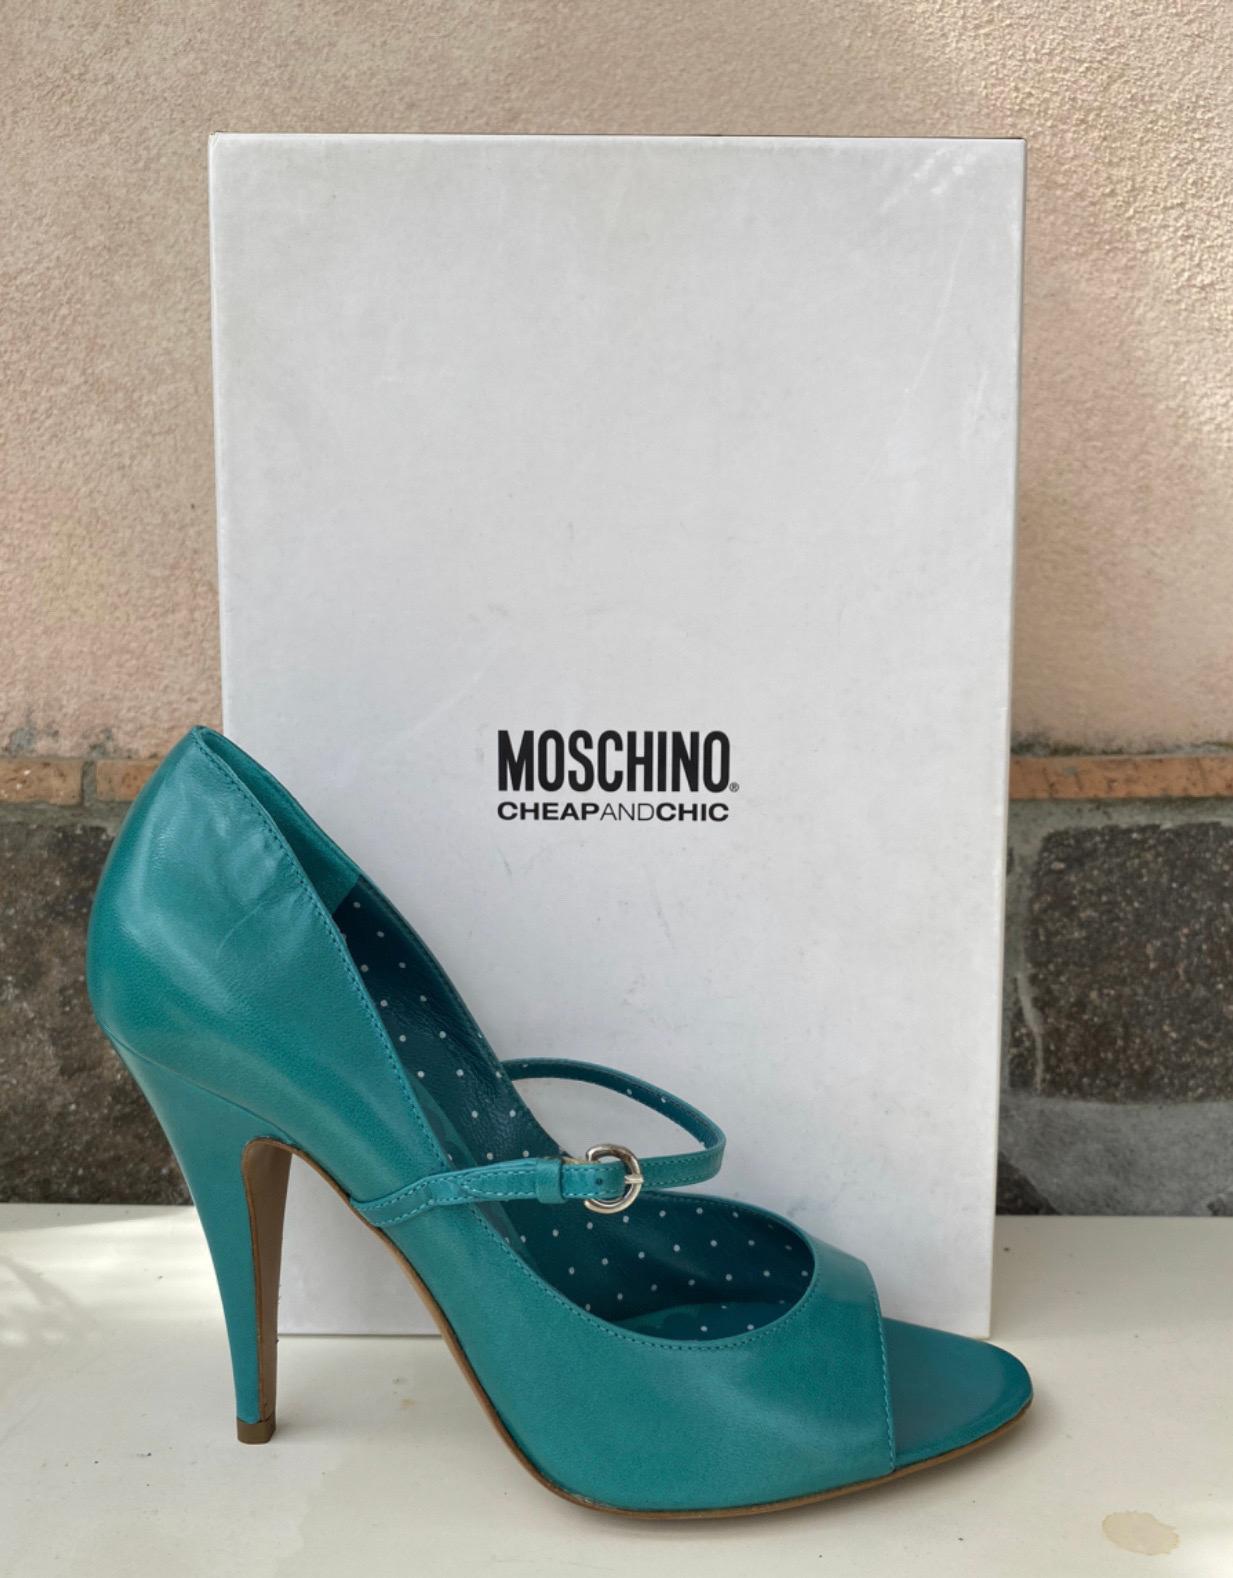 Moschino Cheap & Chic. Open toe. number 39. featuring teal color. measurements: heel 10 cm, insole 25 cm, new, never used, with box